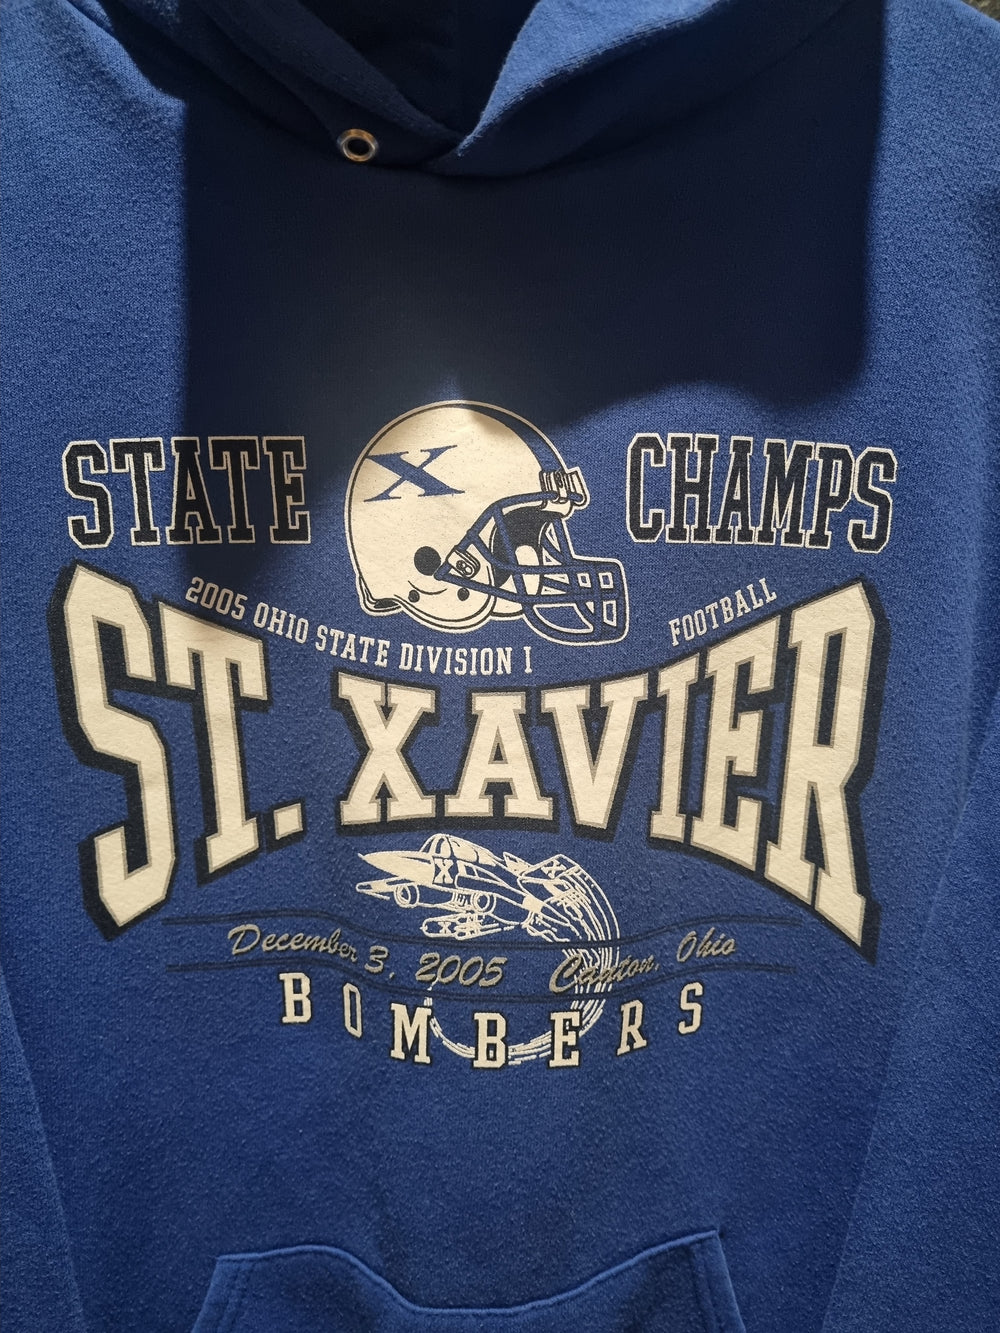 St Xavier College Football State Champs Jerzees Hoodie Large